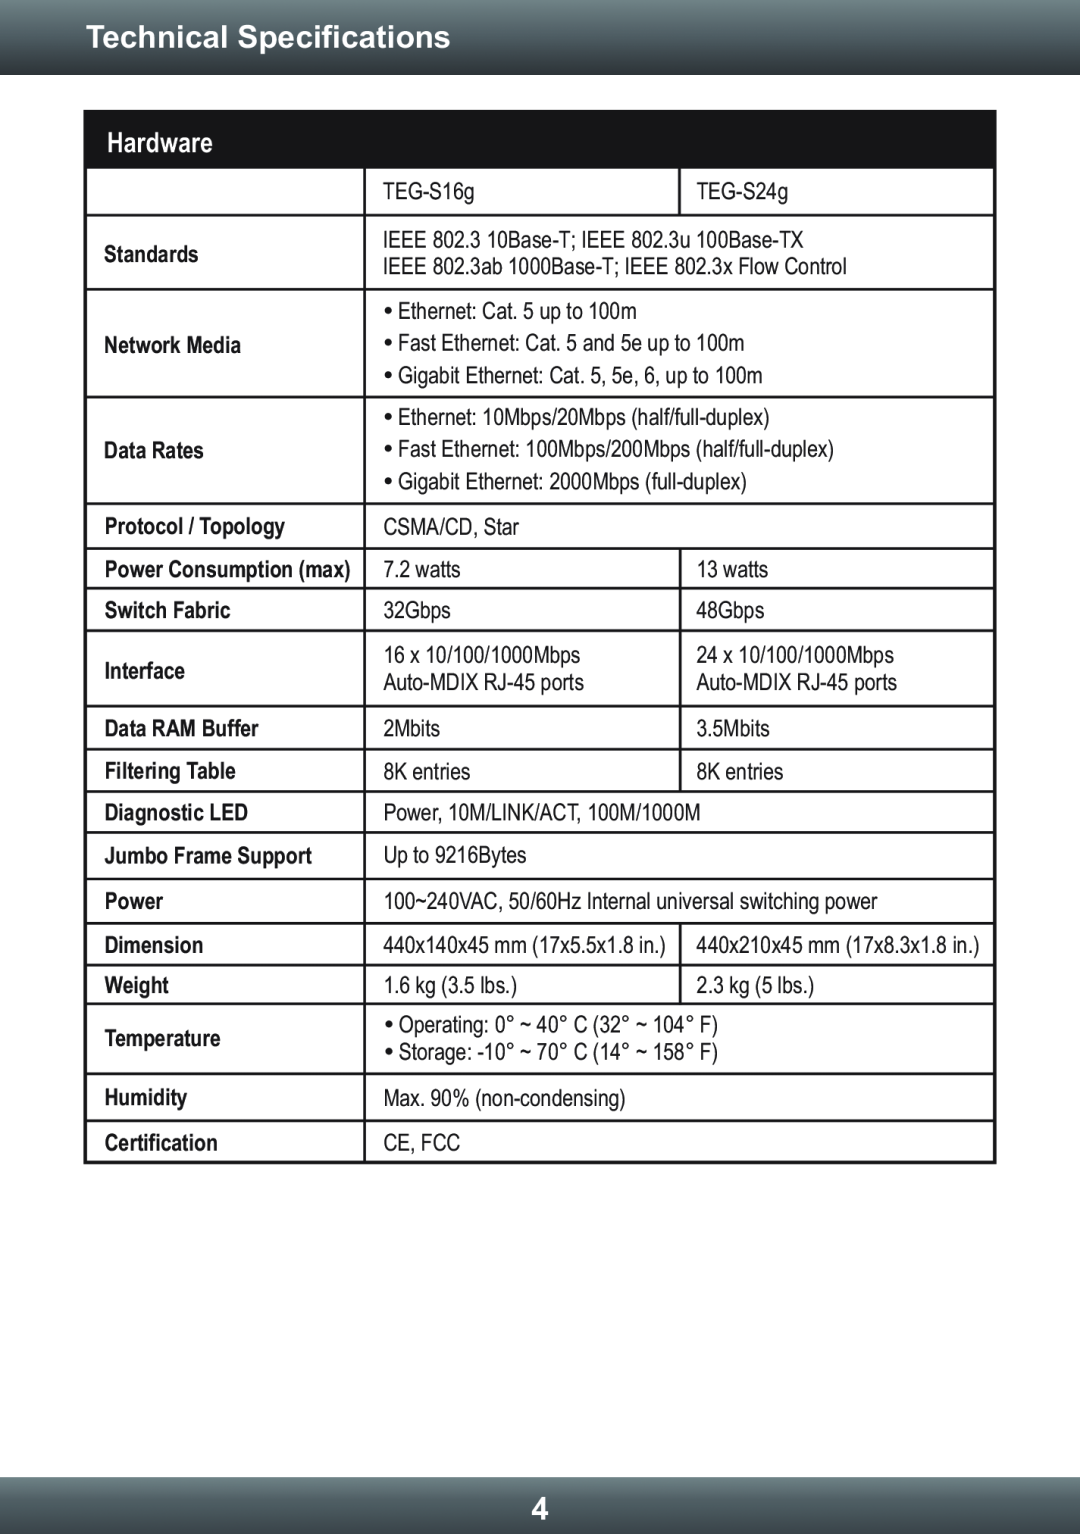 TRENDnet TEGS16g, TEGS24g manual Technical Specifications, Hardware 